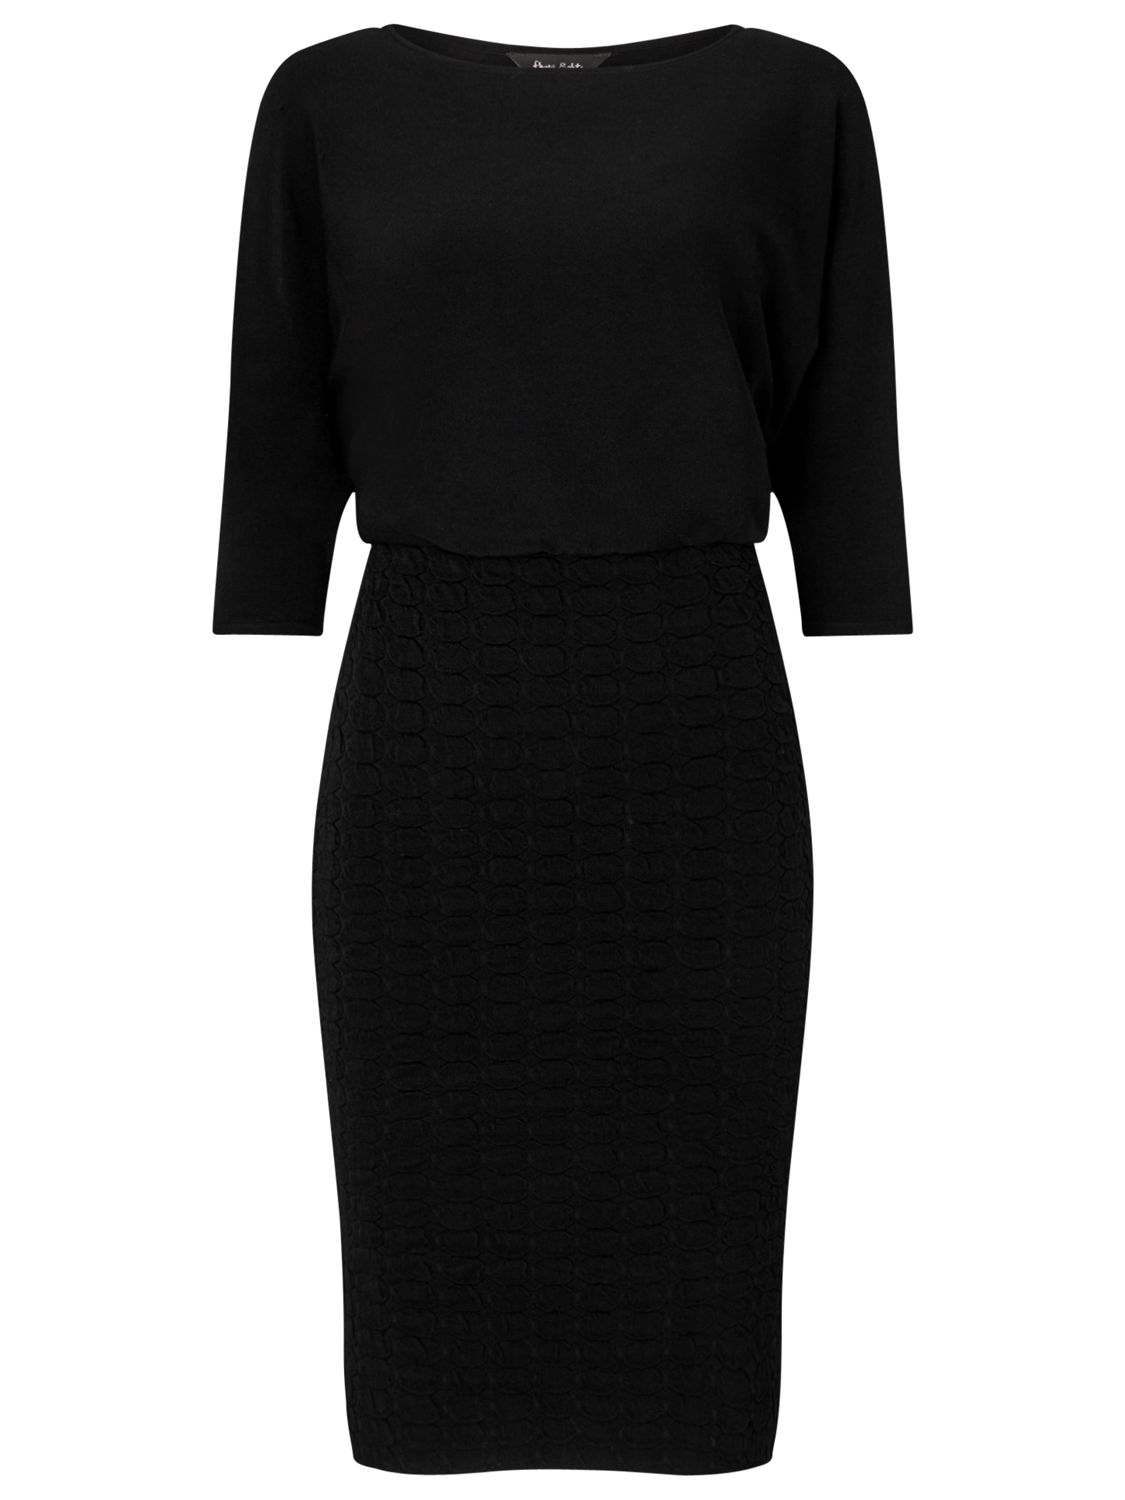 Phase Eight Adele Textured Knitted Dress, Black at John Lewis & Partners